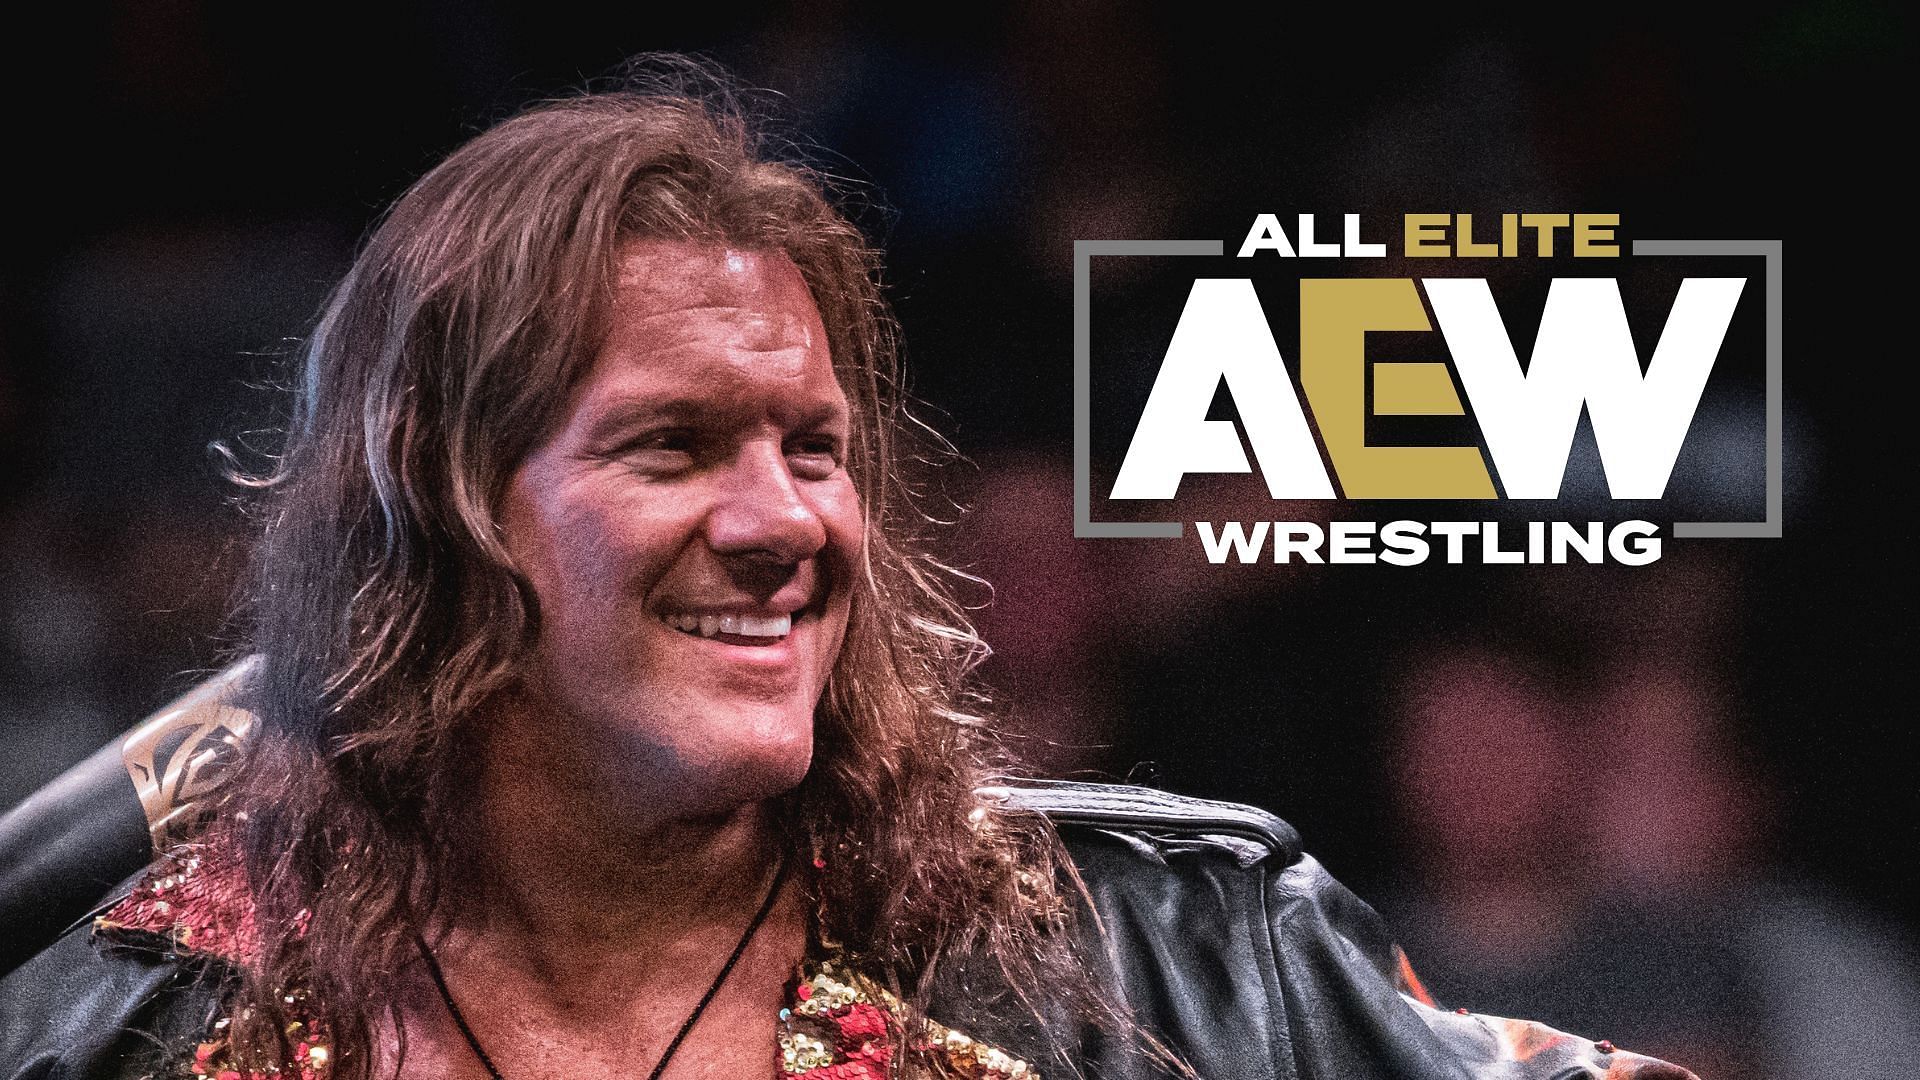 Which recent AEW signing does Chris Jericho think is a statement?